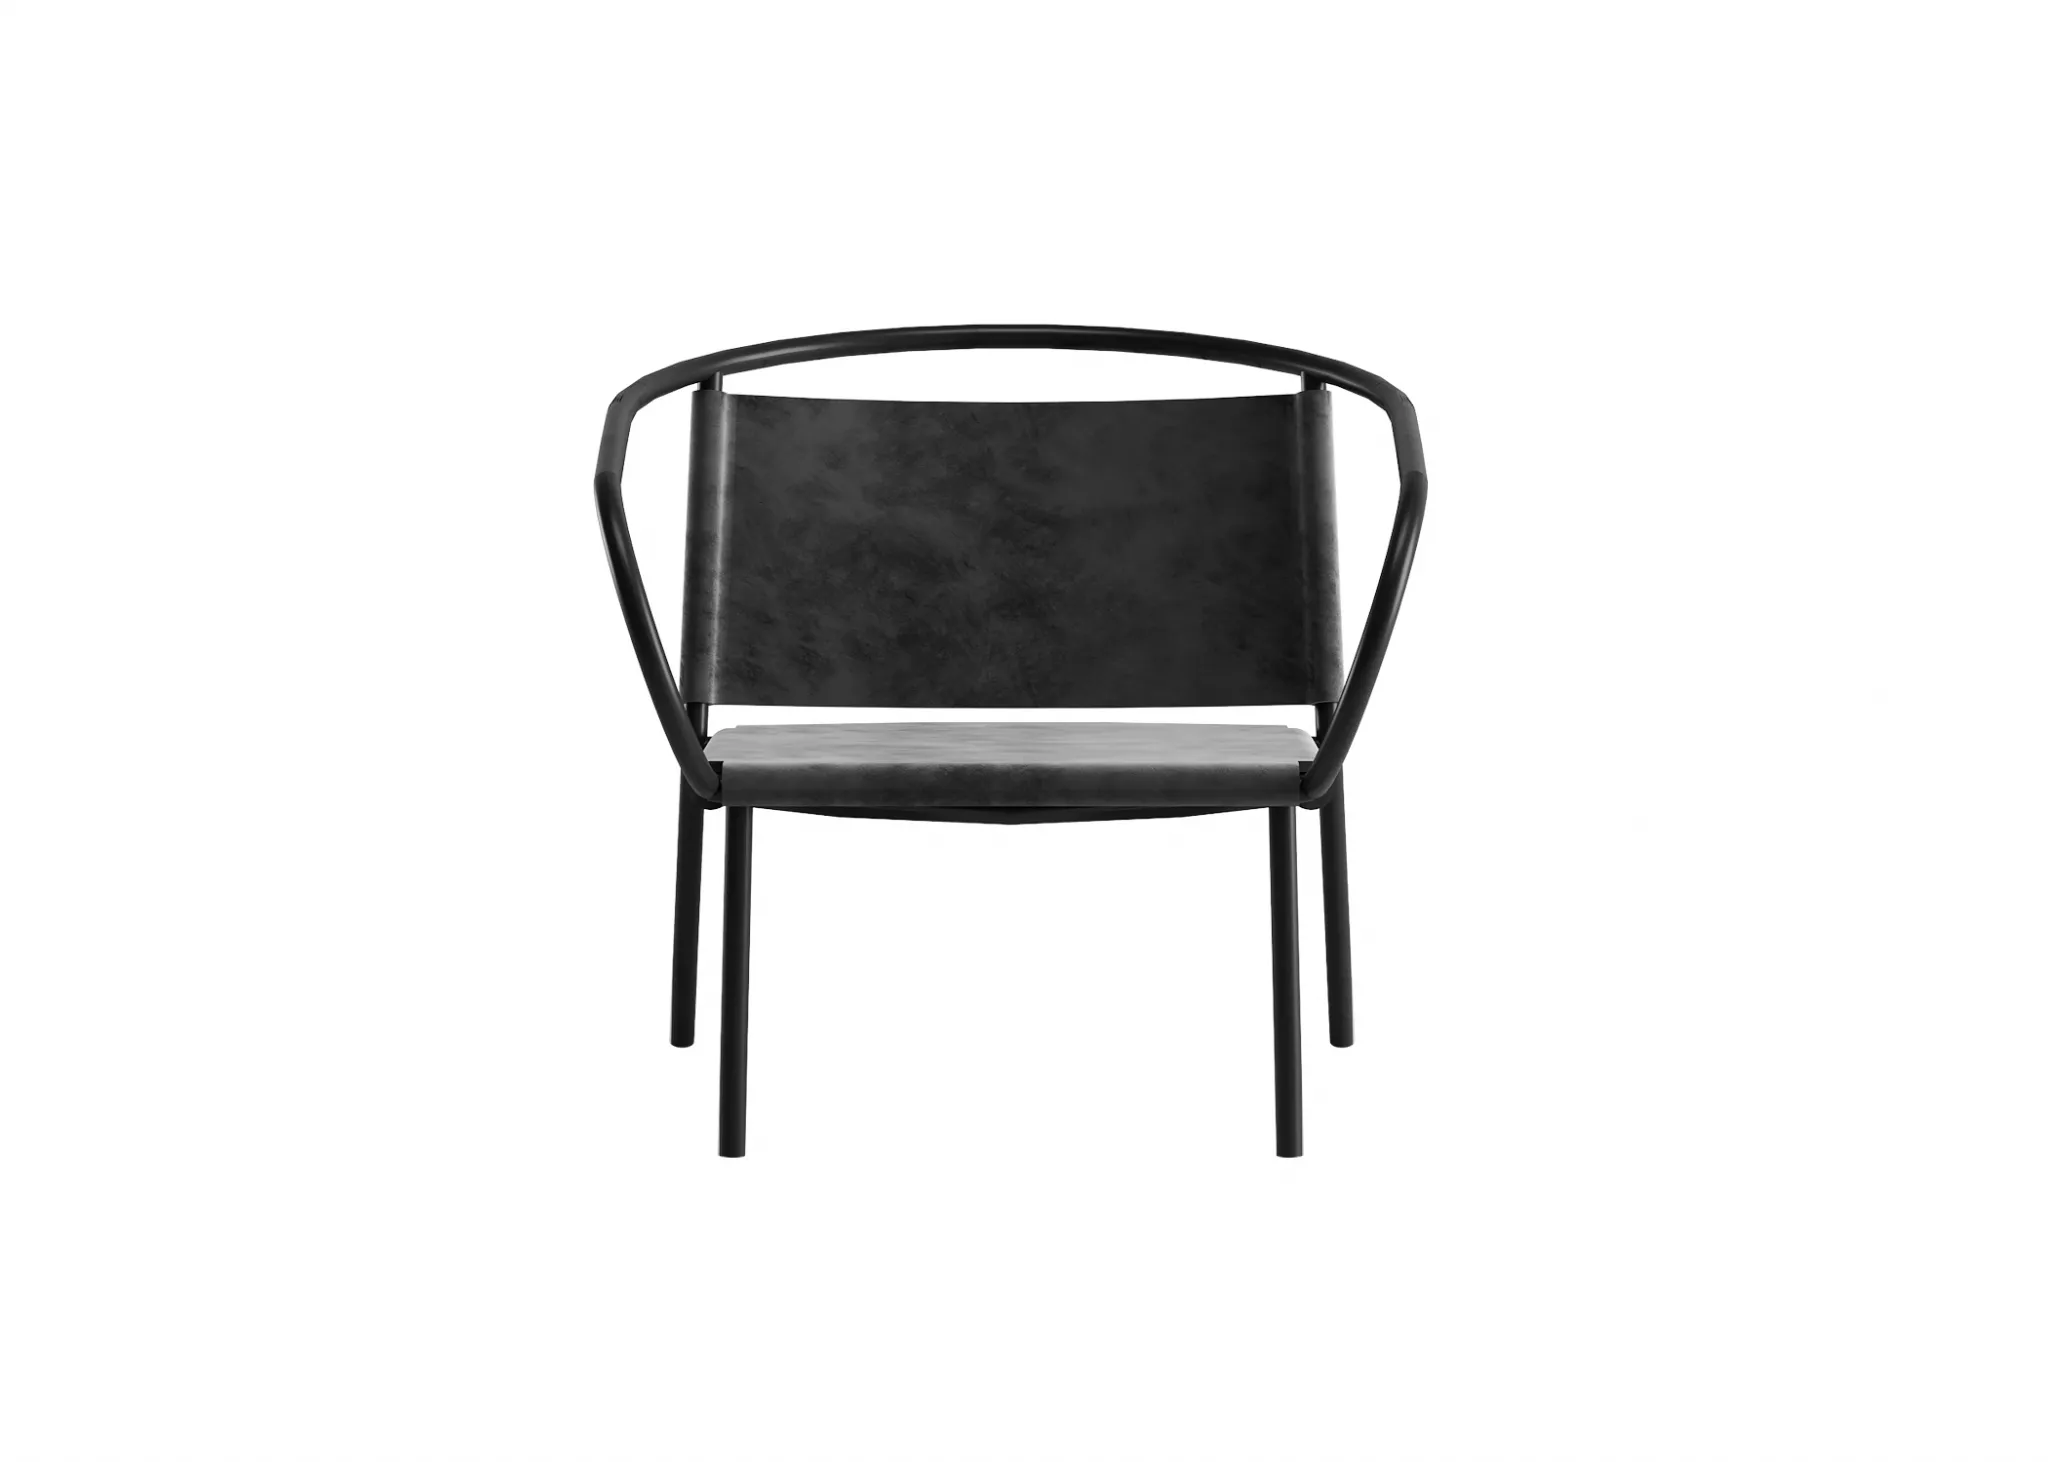 FURNITURE 3D MODELS – CHAIRS – 0124